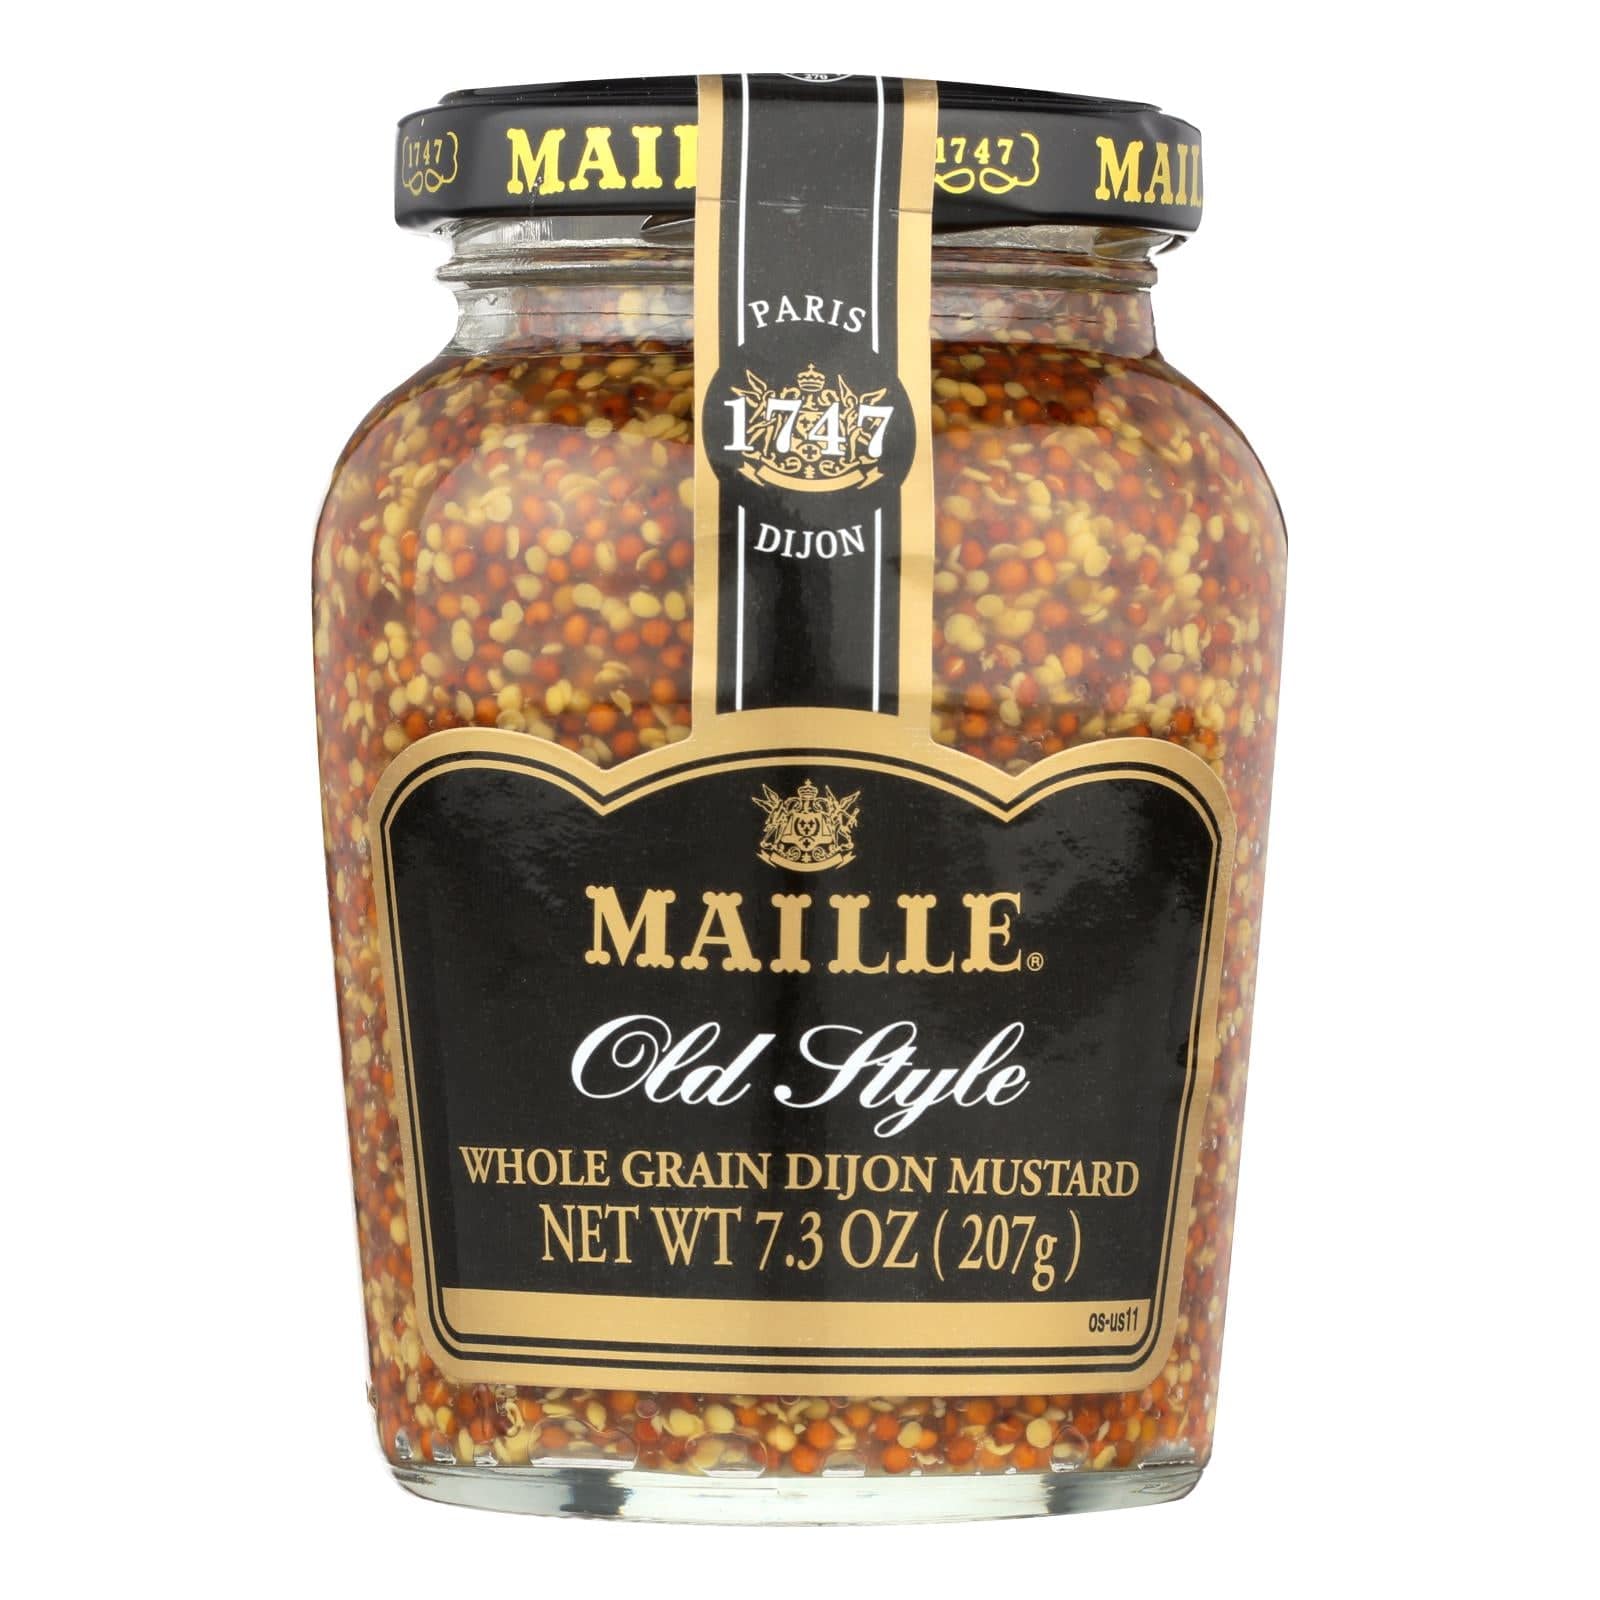 Maille Old Style Whole Grain Dijon Mustard - Case Of 6 - 7.3 Oz. | OnlyNaturals.us